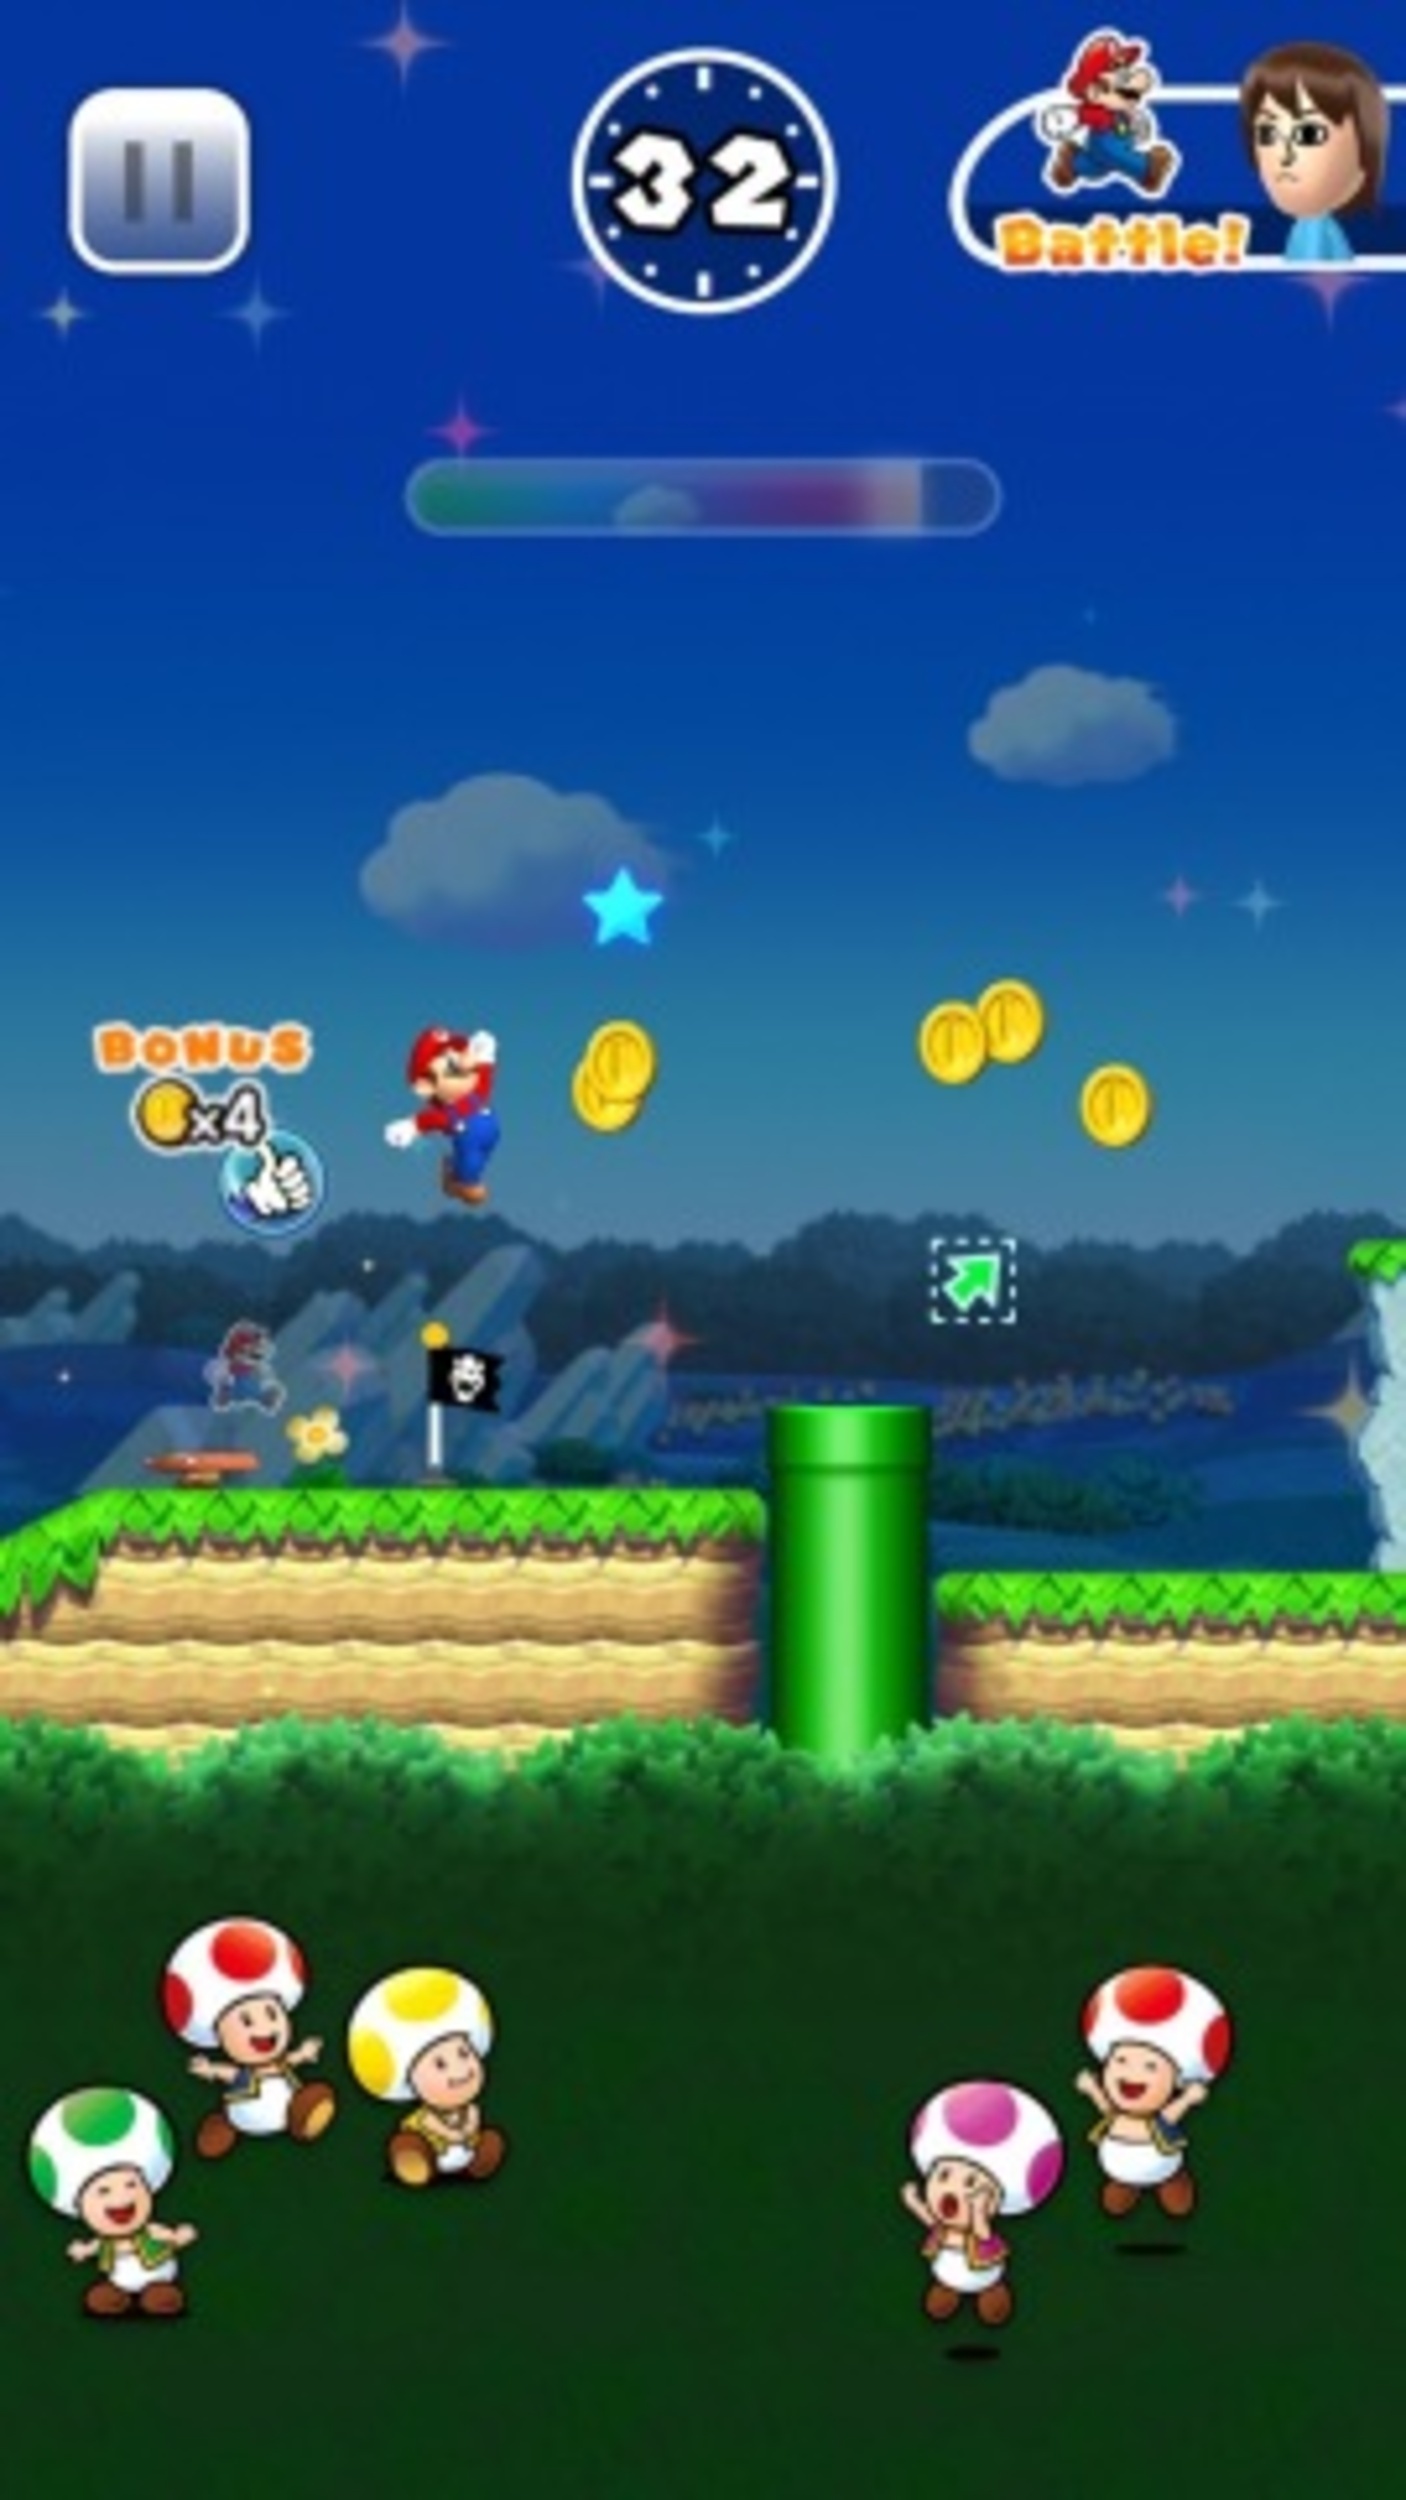 <p>Just before Nintendo climbed back to the top of gamers' Christmas lists with its Nintendo Switch console, it tried to take one more stab at making its games' portable by producing a series of smartphone apps, starting with this tired Super Mario clone for iPhones. </p><p><em>Super Mario Run</em> plays like a traditional <em>Super Mario</em> game, but it does the running for you. You can control when Mario or Luigi jumps or throws fireballs, but that's it. <em>Super Mario Run</em> turns the Mario game experience into a boring puzzle game where you don't care what the final picture looks like because you'd rather someone just ported all the original Mario games to your phone instead. </p><p><a href='https://www.msn.com/en-us/community/channel/vid-cj9pqbr0vn9in2b6ddcd8sfgpfq6x6utp44fssrv6mc2gtybw0us'>Did you enjoy this slideshow? Follow us on MSN to see more of our exclusive entertainment content.</a></p>